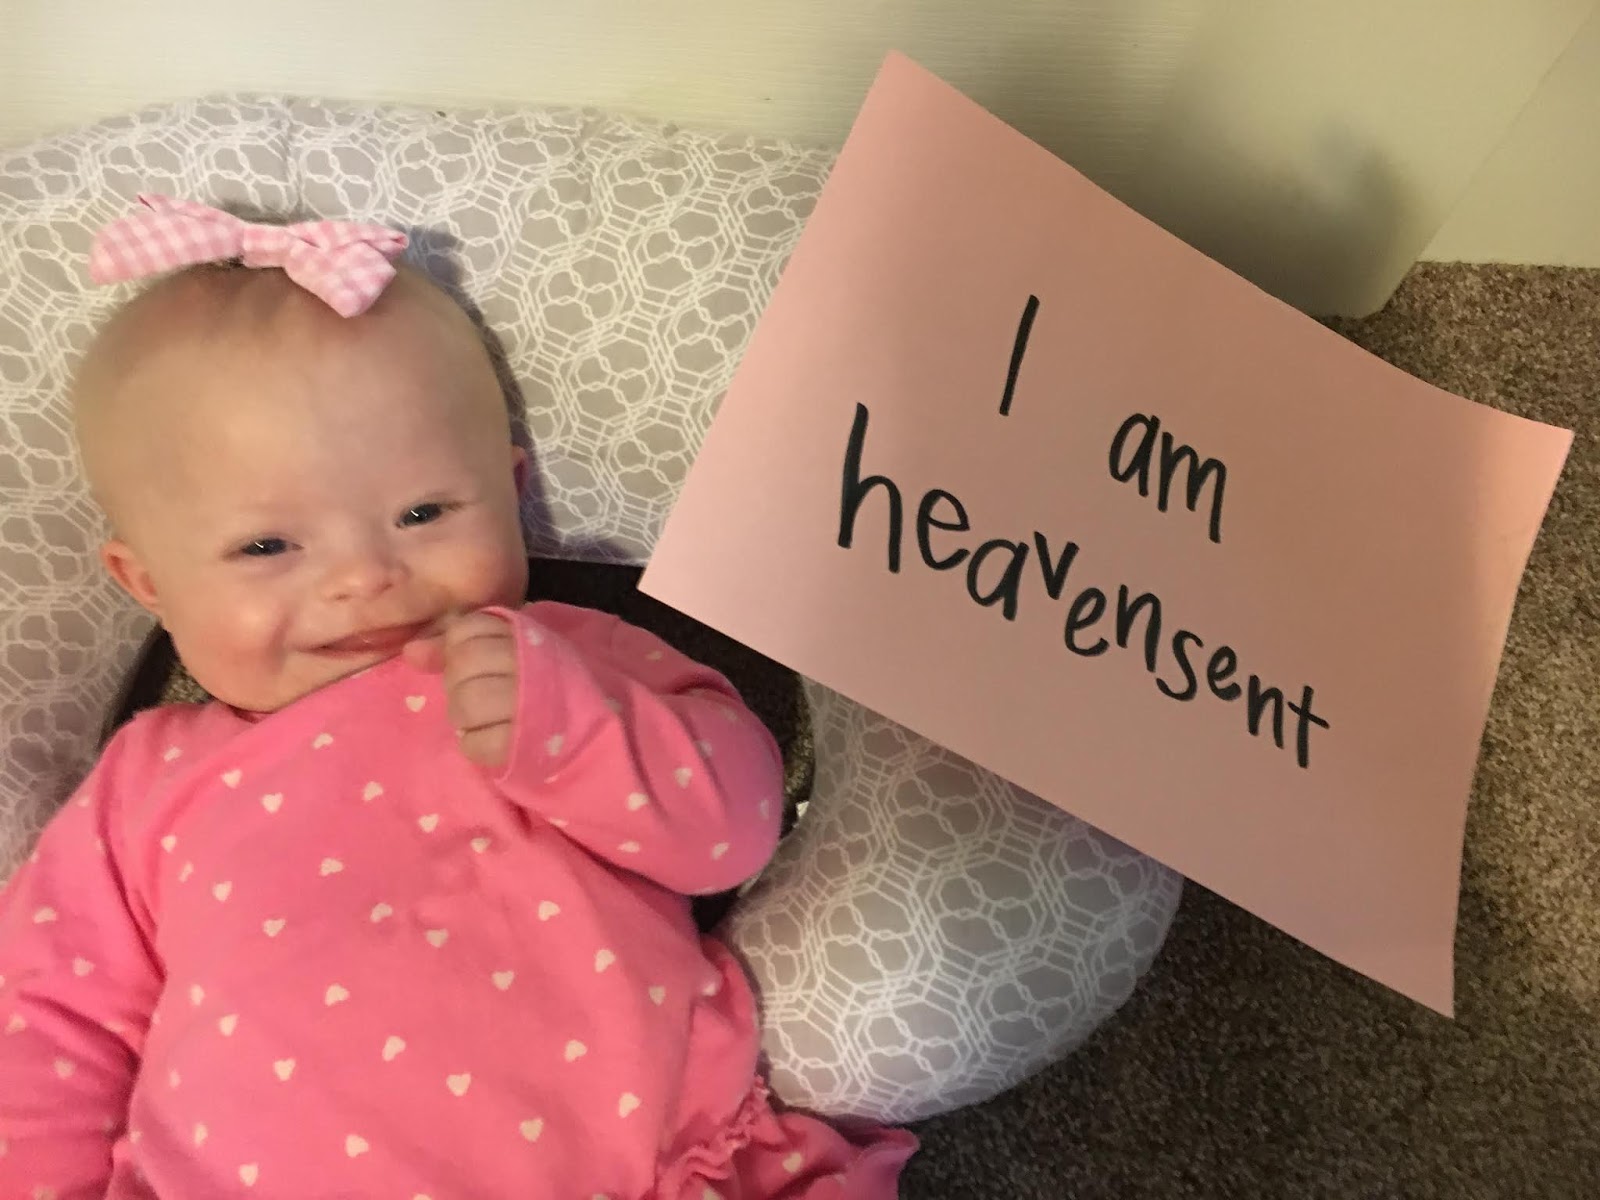 Alice with a note next to her "I am heavensent."